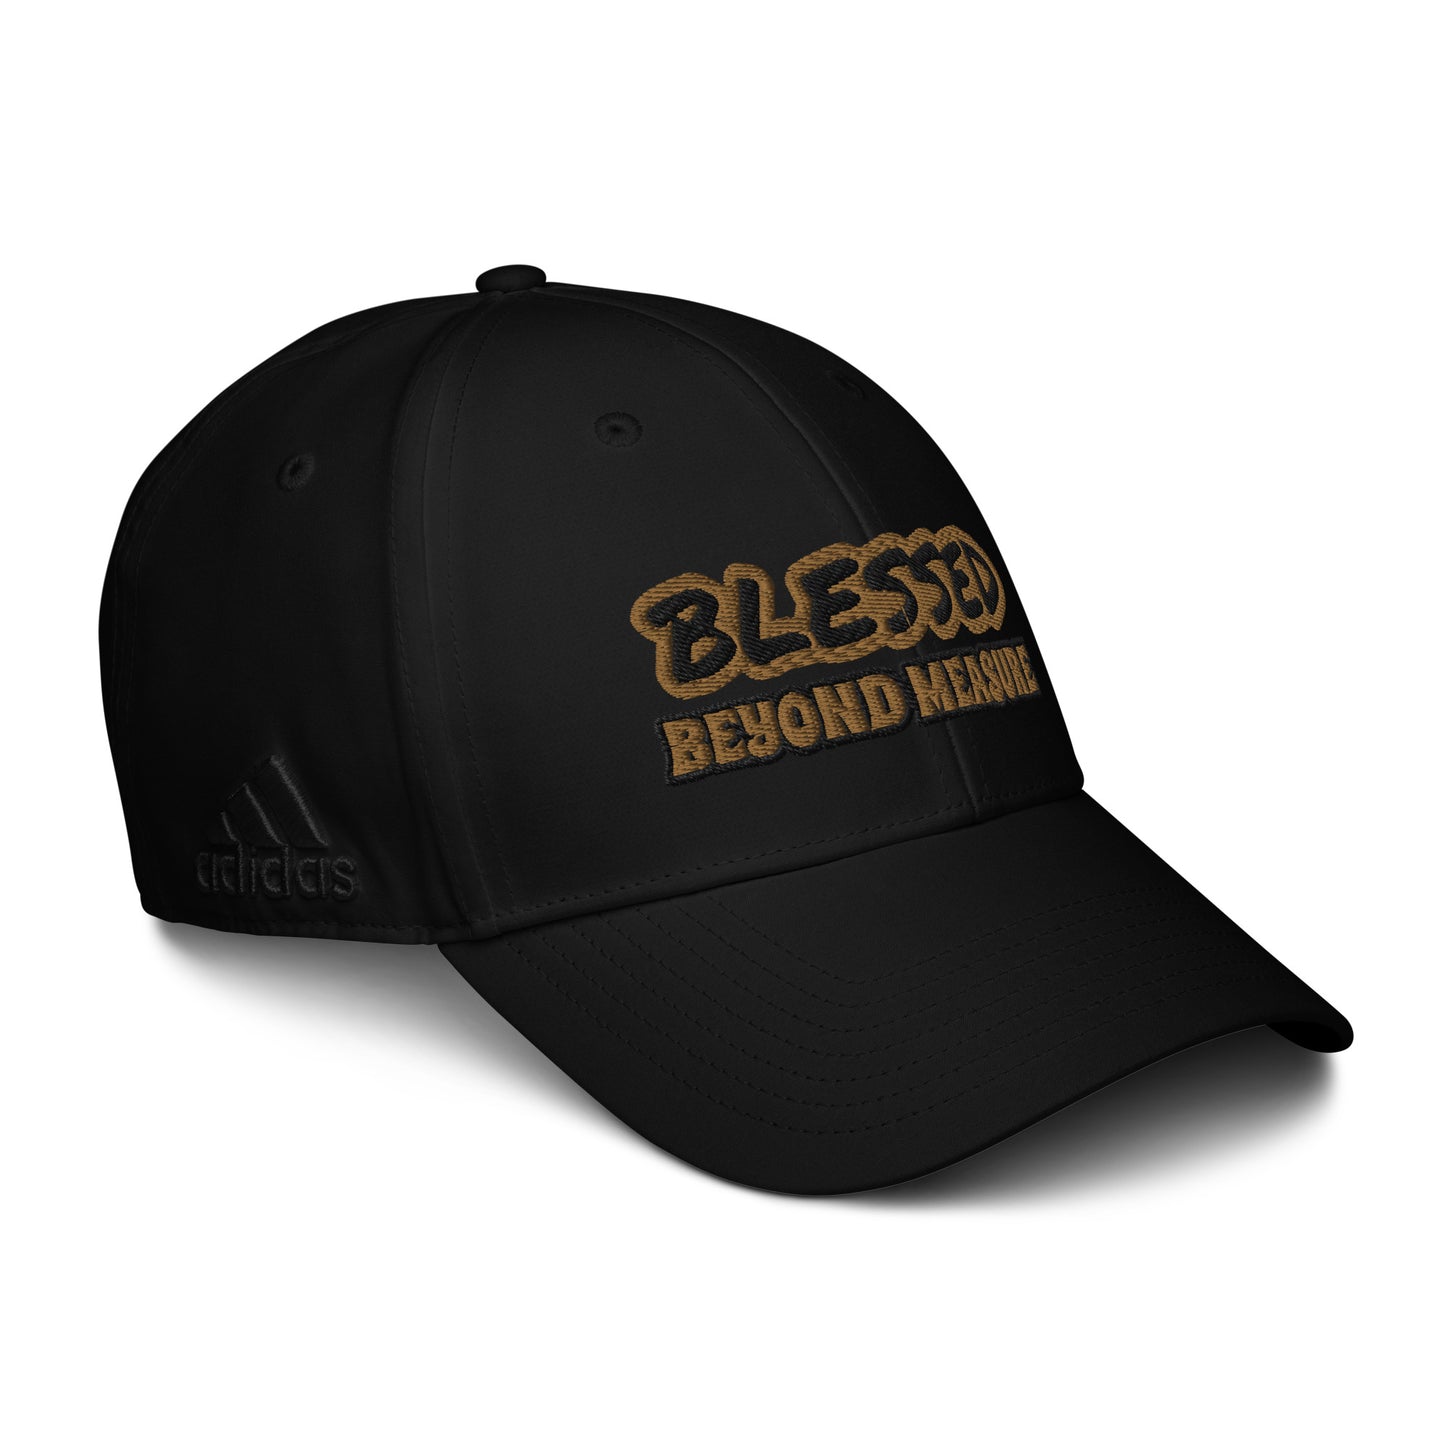 BLESSED- adidas dad hat